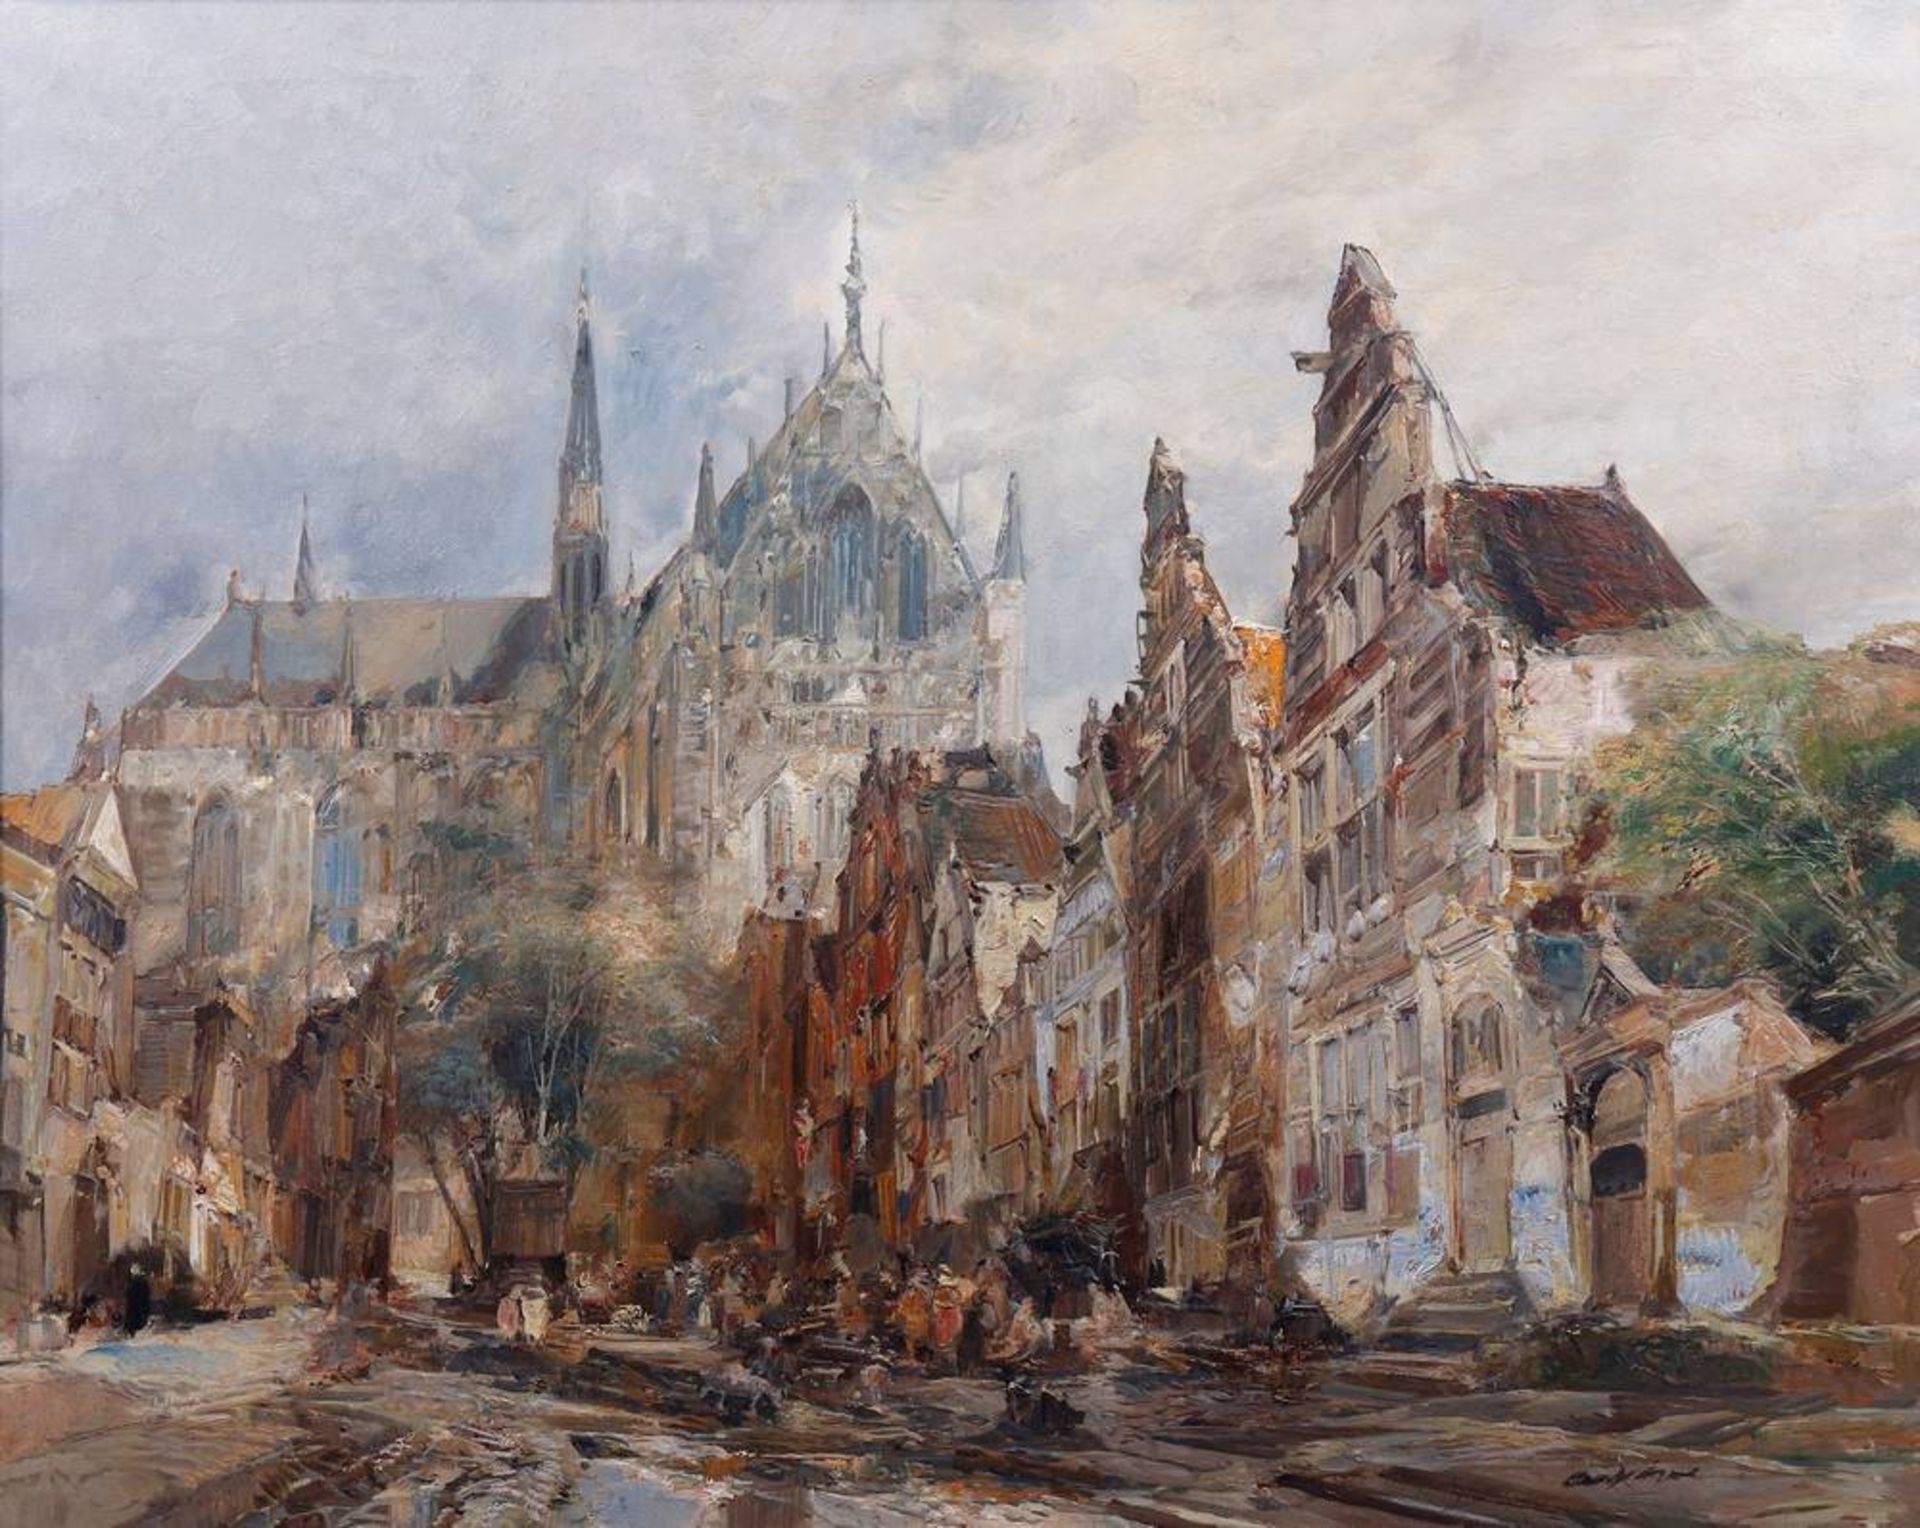 Market square in front of the backdrop of (Dutch?) gabled houses and a large cathedral - Image 2 of 4